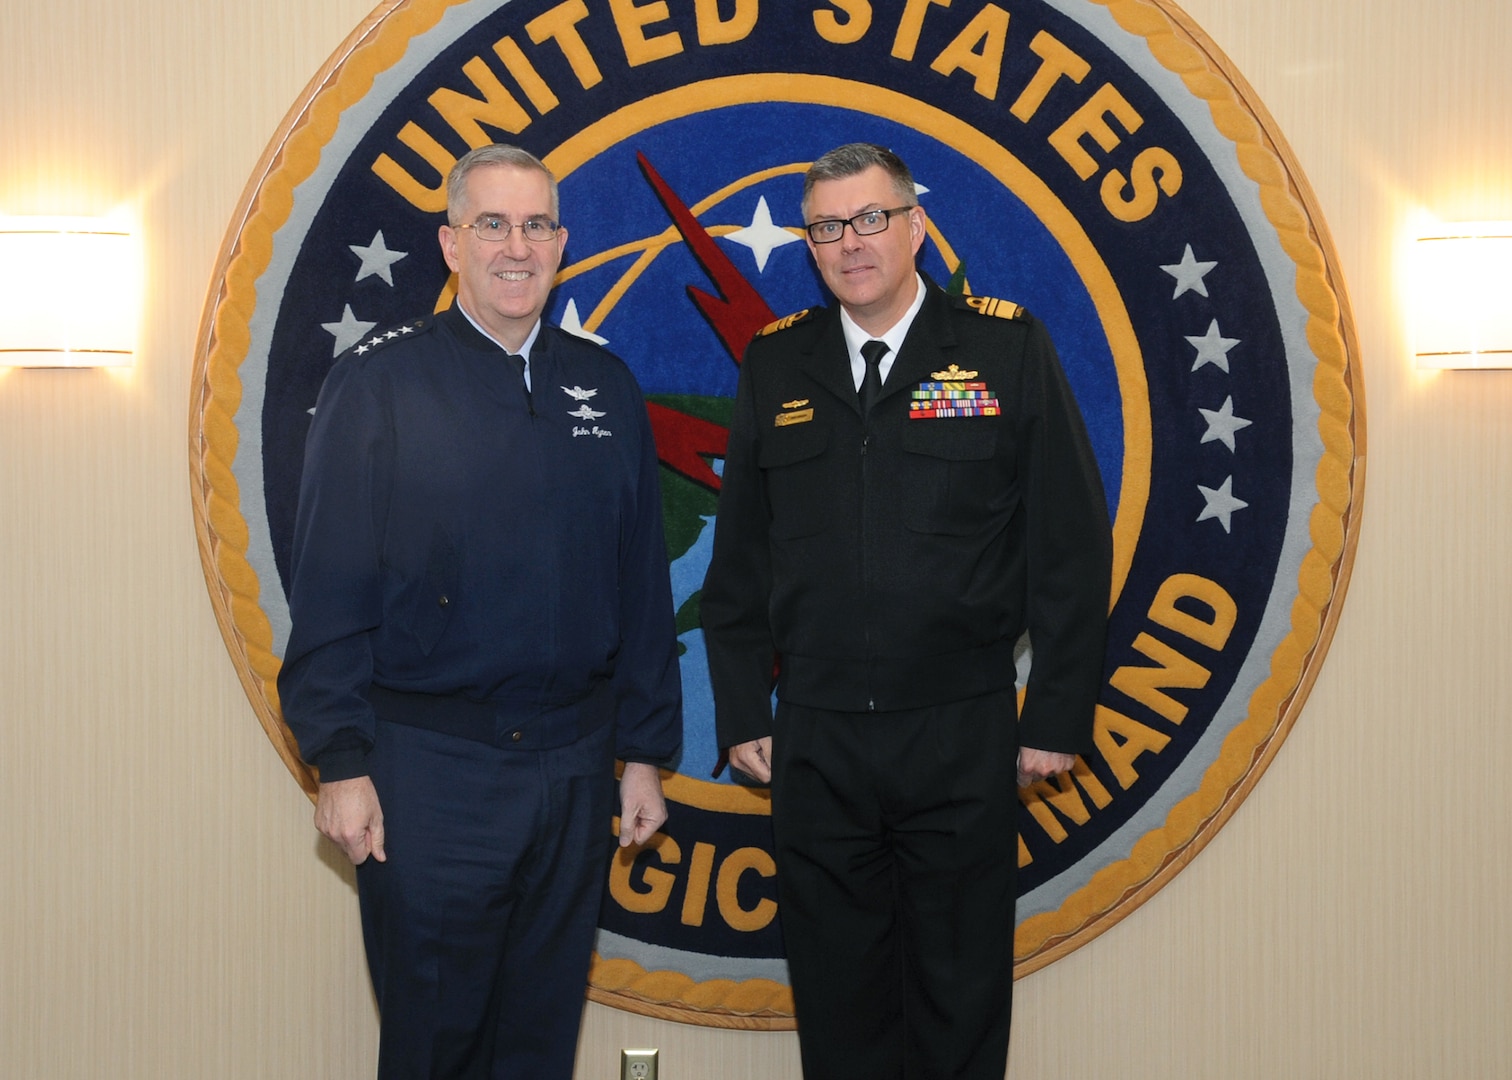 U.S. Air Force Gen. John Hyten, commander of U.S. Strategic Command (USSTRATCOM), meets with Australian Navy Vice Adm. Raymond Griggs, Vice Chief of the Defence Force, at Offutt Air Force Base, Neb., Feb. 21, 2018. During his visit, Griggs participated in bilateral discussions with Hyten and other USSTRATCOM leaders and subject matter experts on a variety of topics of mutual interest for Australia and the United States. Engagements like this are part of the long-standing partnership between the two allies to promote regional and global stability. One of nine Department of Defense unified combatant commands, USSTRATCOM has global responsibilities assigned through the Unified Command Plan that include strategic deterrence, nuclear operations, space operations, joint electromagnetic spectrum operations, global strike, missile defense, and analysis and targeting.